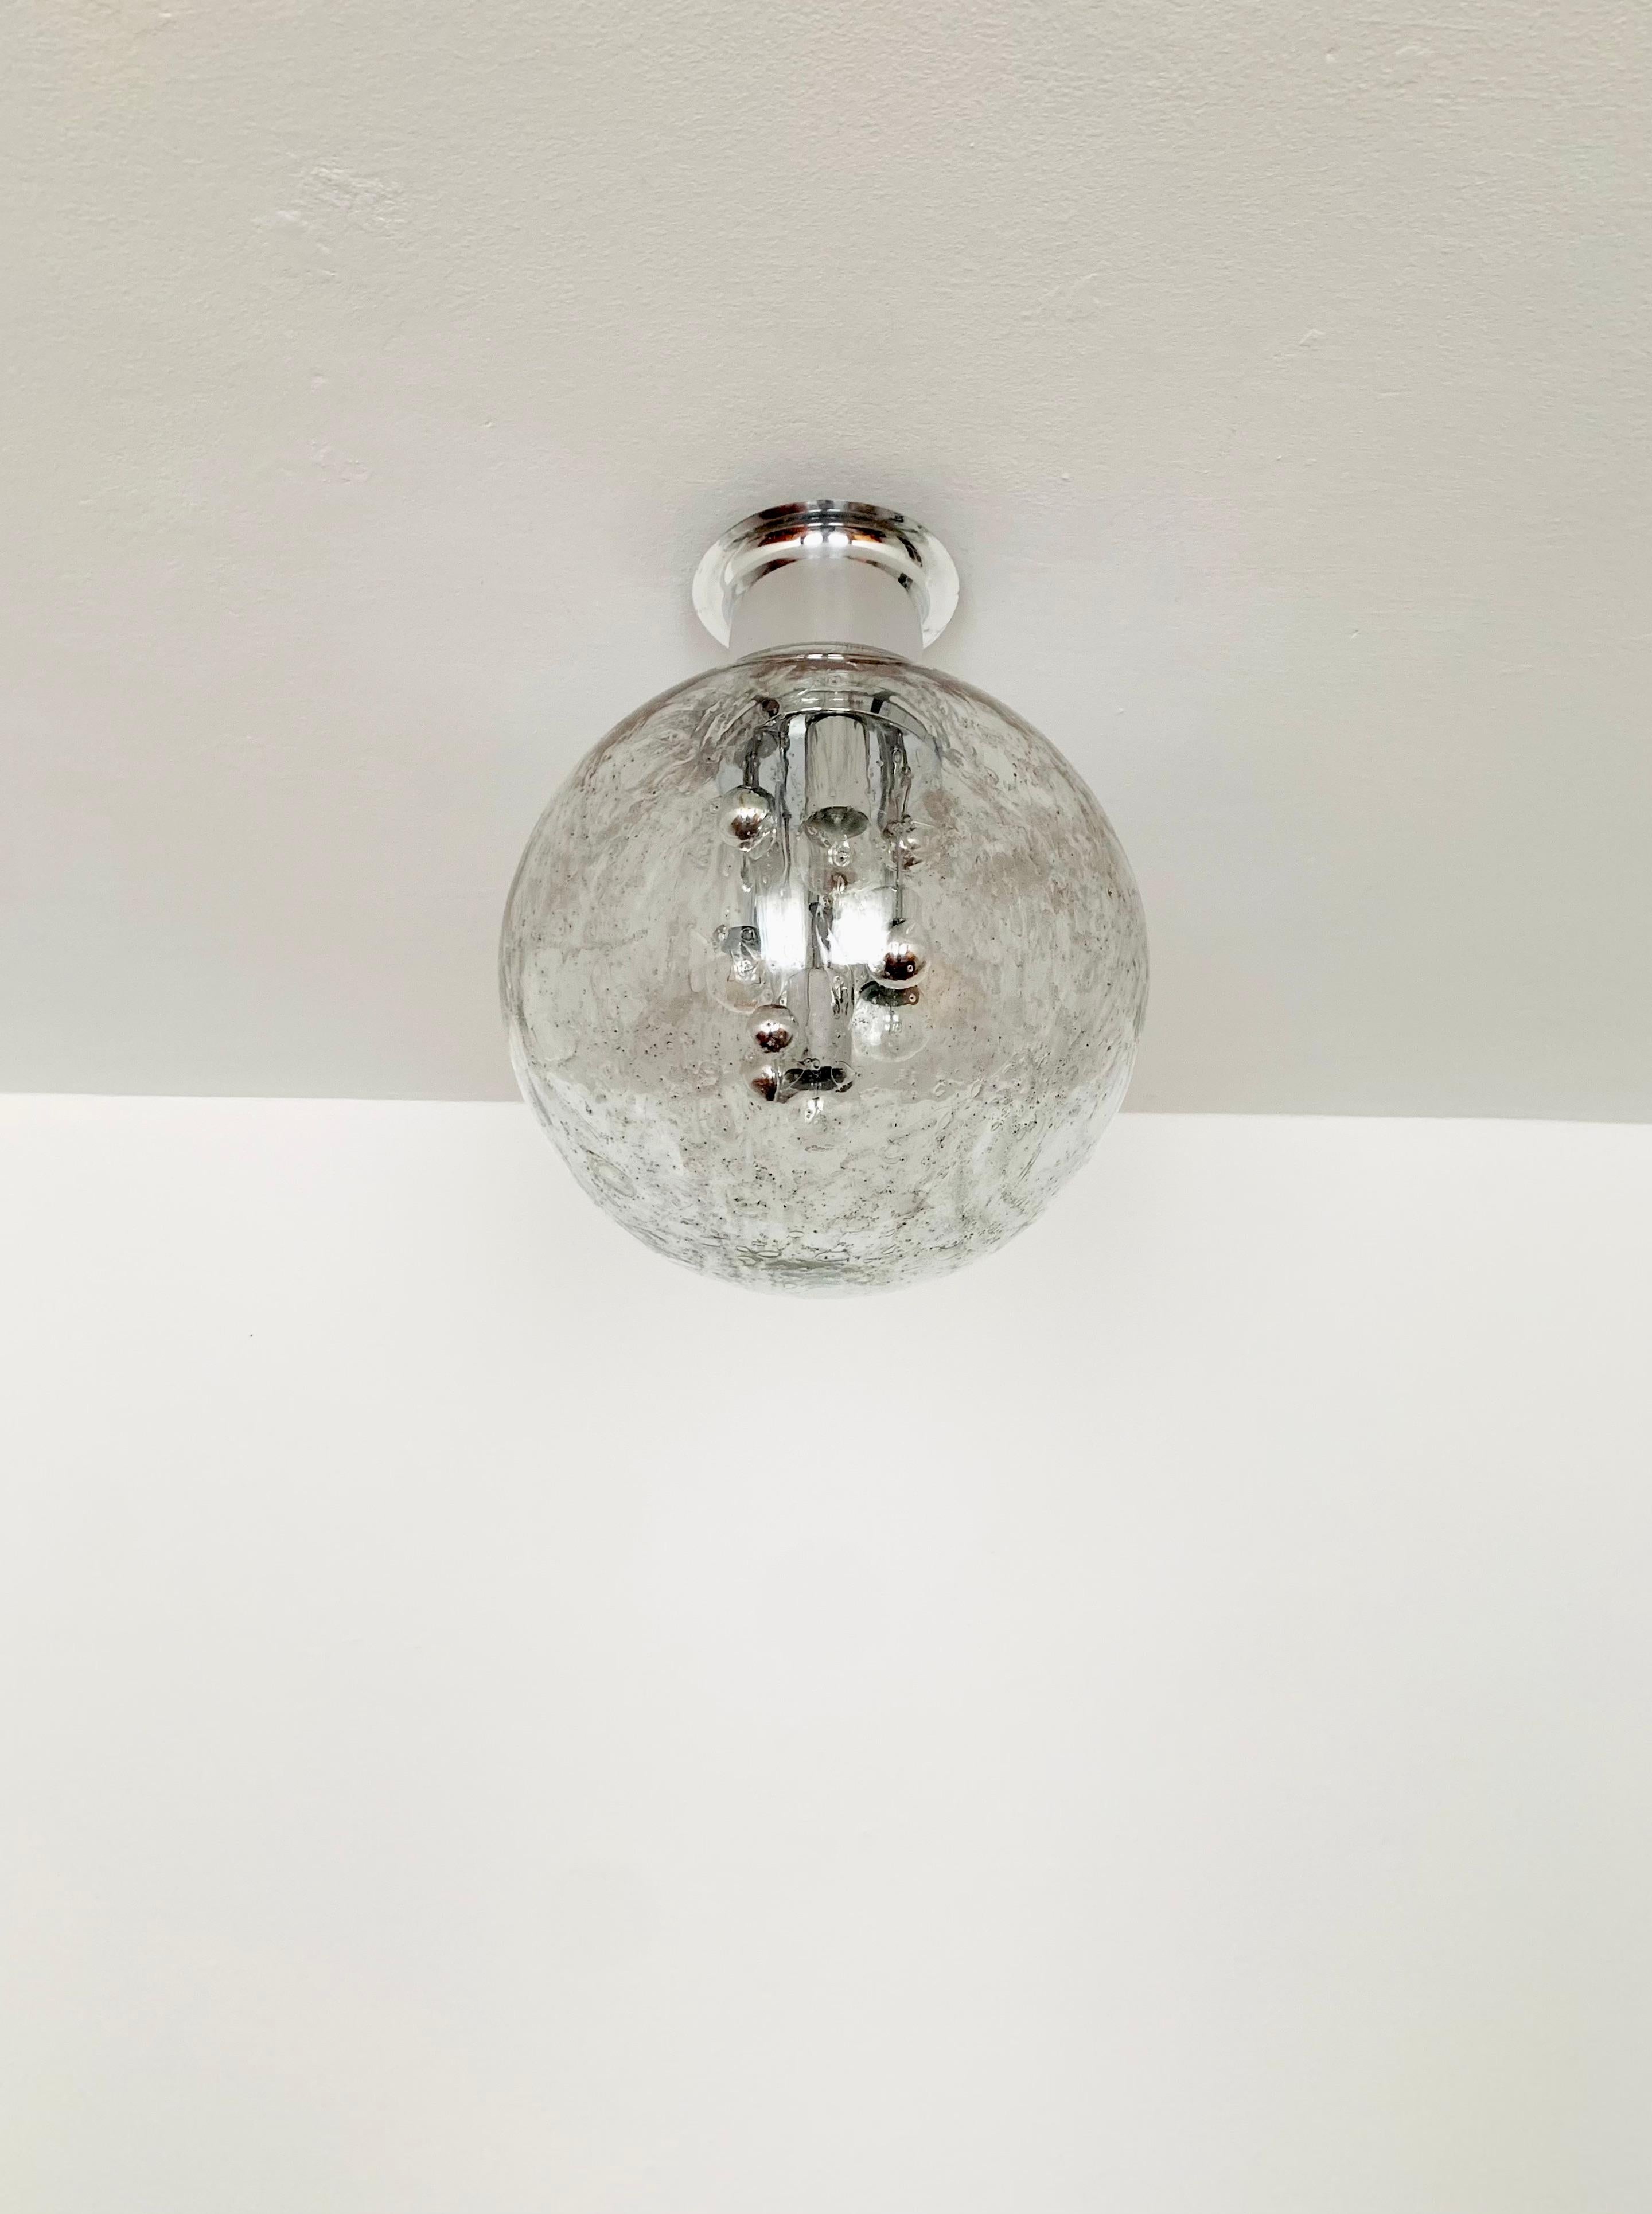 Very beautiful and large ice glass Big Ball ceiling lamp by Doria from the 1960s.
Very elegant Hollywood Regency design with a fantastically glamorous look.
The structure in the glass creates a very sparkling light.

Manufacturer: